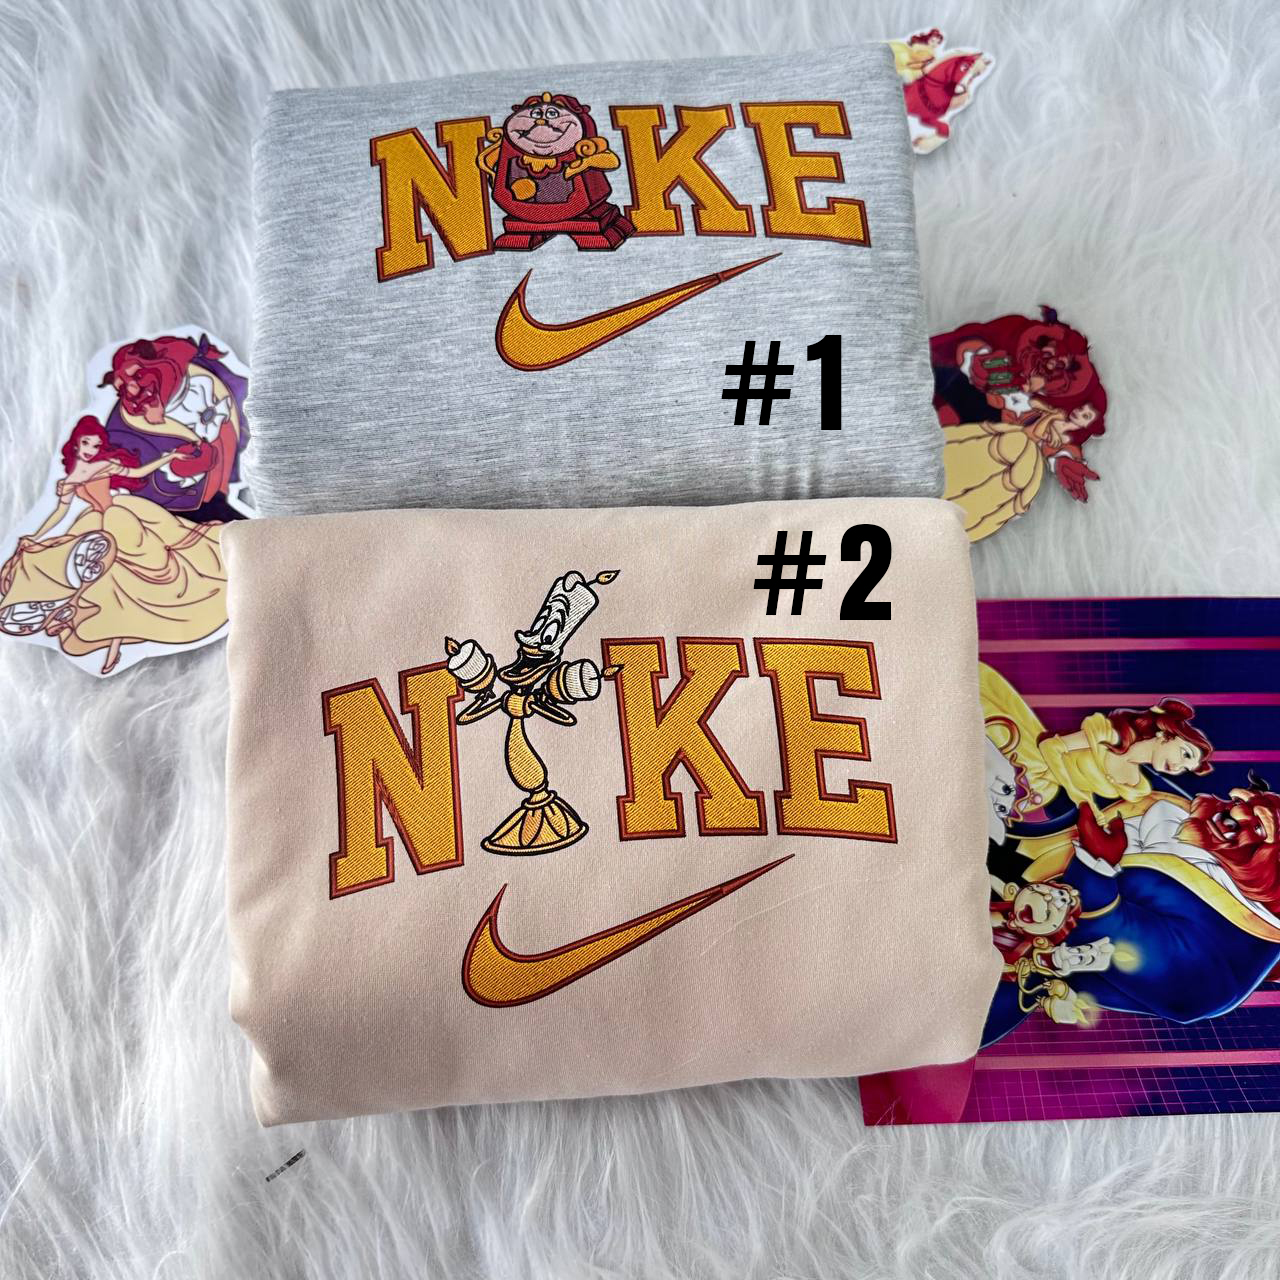 Lumiere And Cogsworth Beauty and the Beast Disney Nike Embroidered Sweatshirts